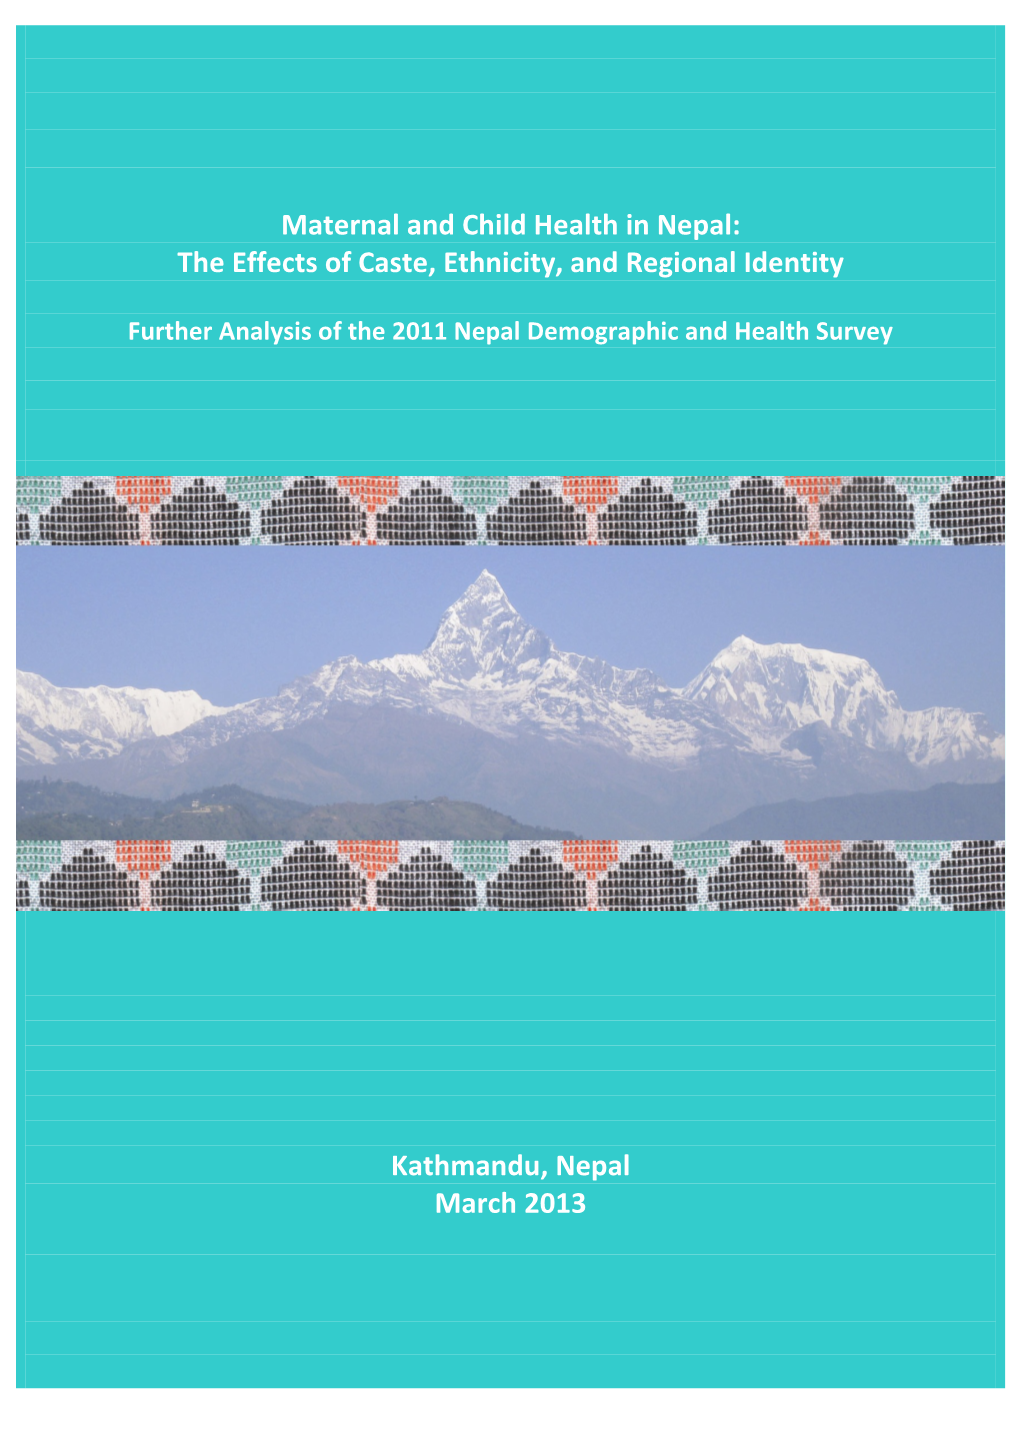 Maternal and Child Health in Nepal: the Effects of Caste, Ethnicity, and Regional Identity